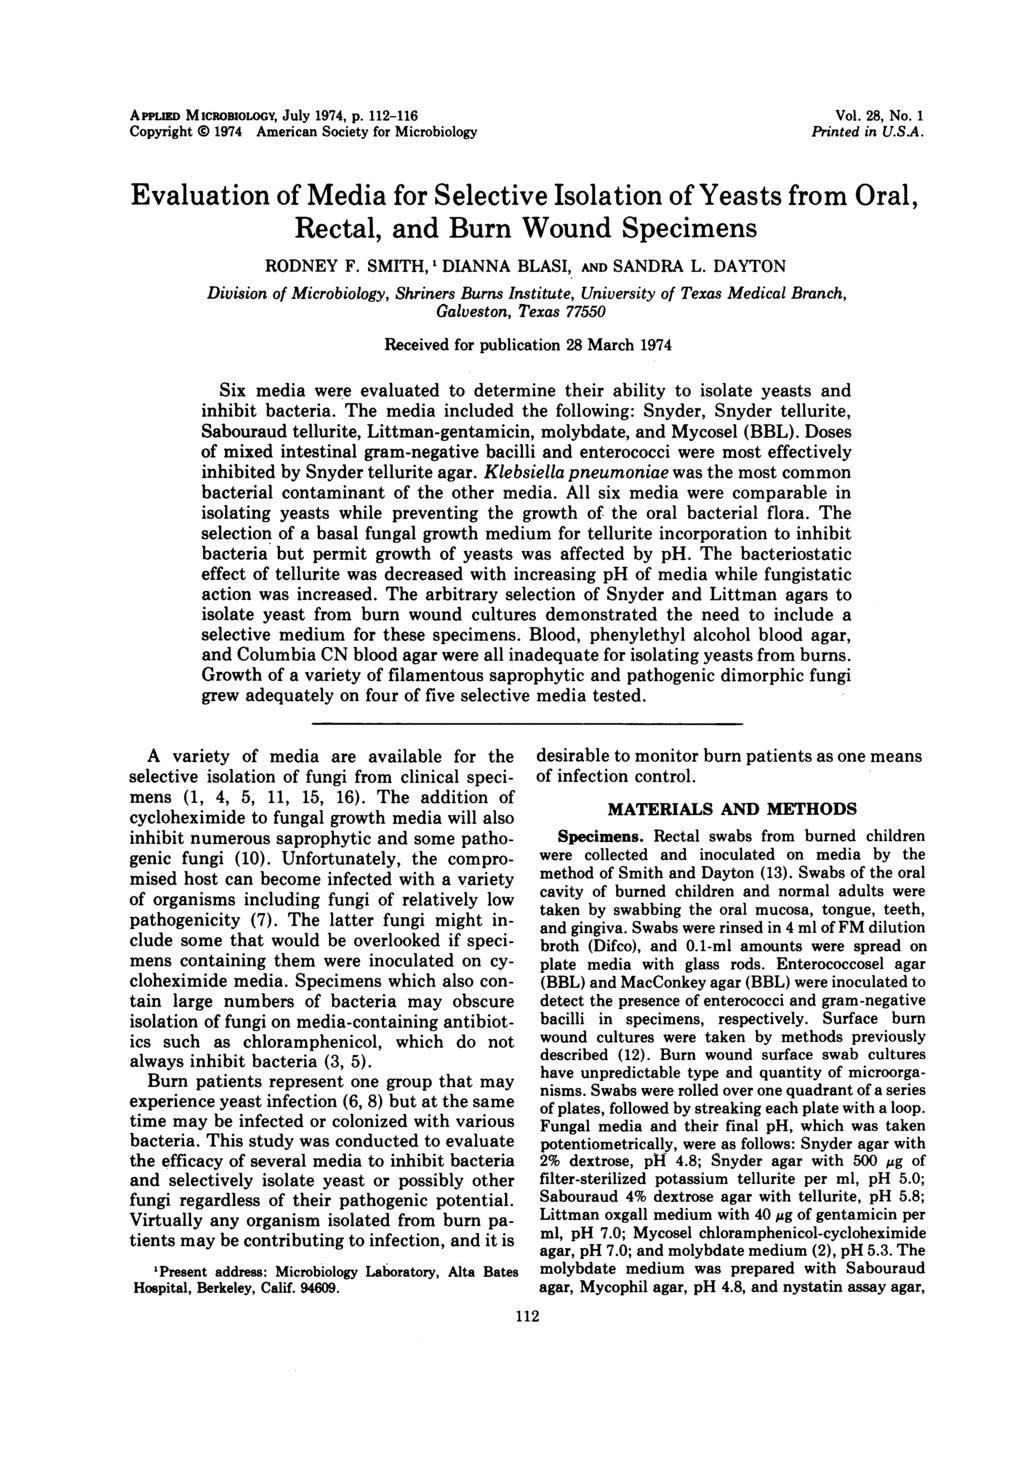 ApPLm MICROBIOLOGY, July 1974, p. 112-116 Copyright 0 1974 American Society for Microbiology Vol. 28, No. 1 Printed in U.SA.